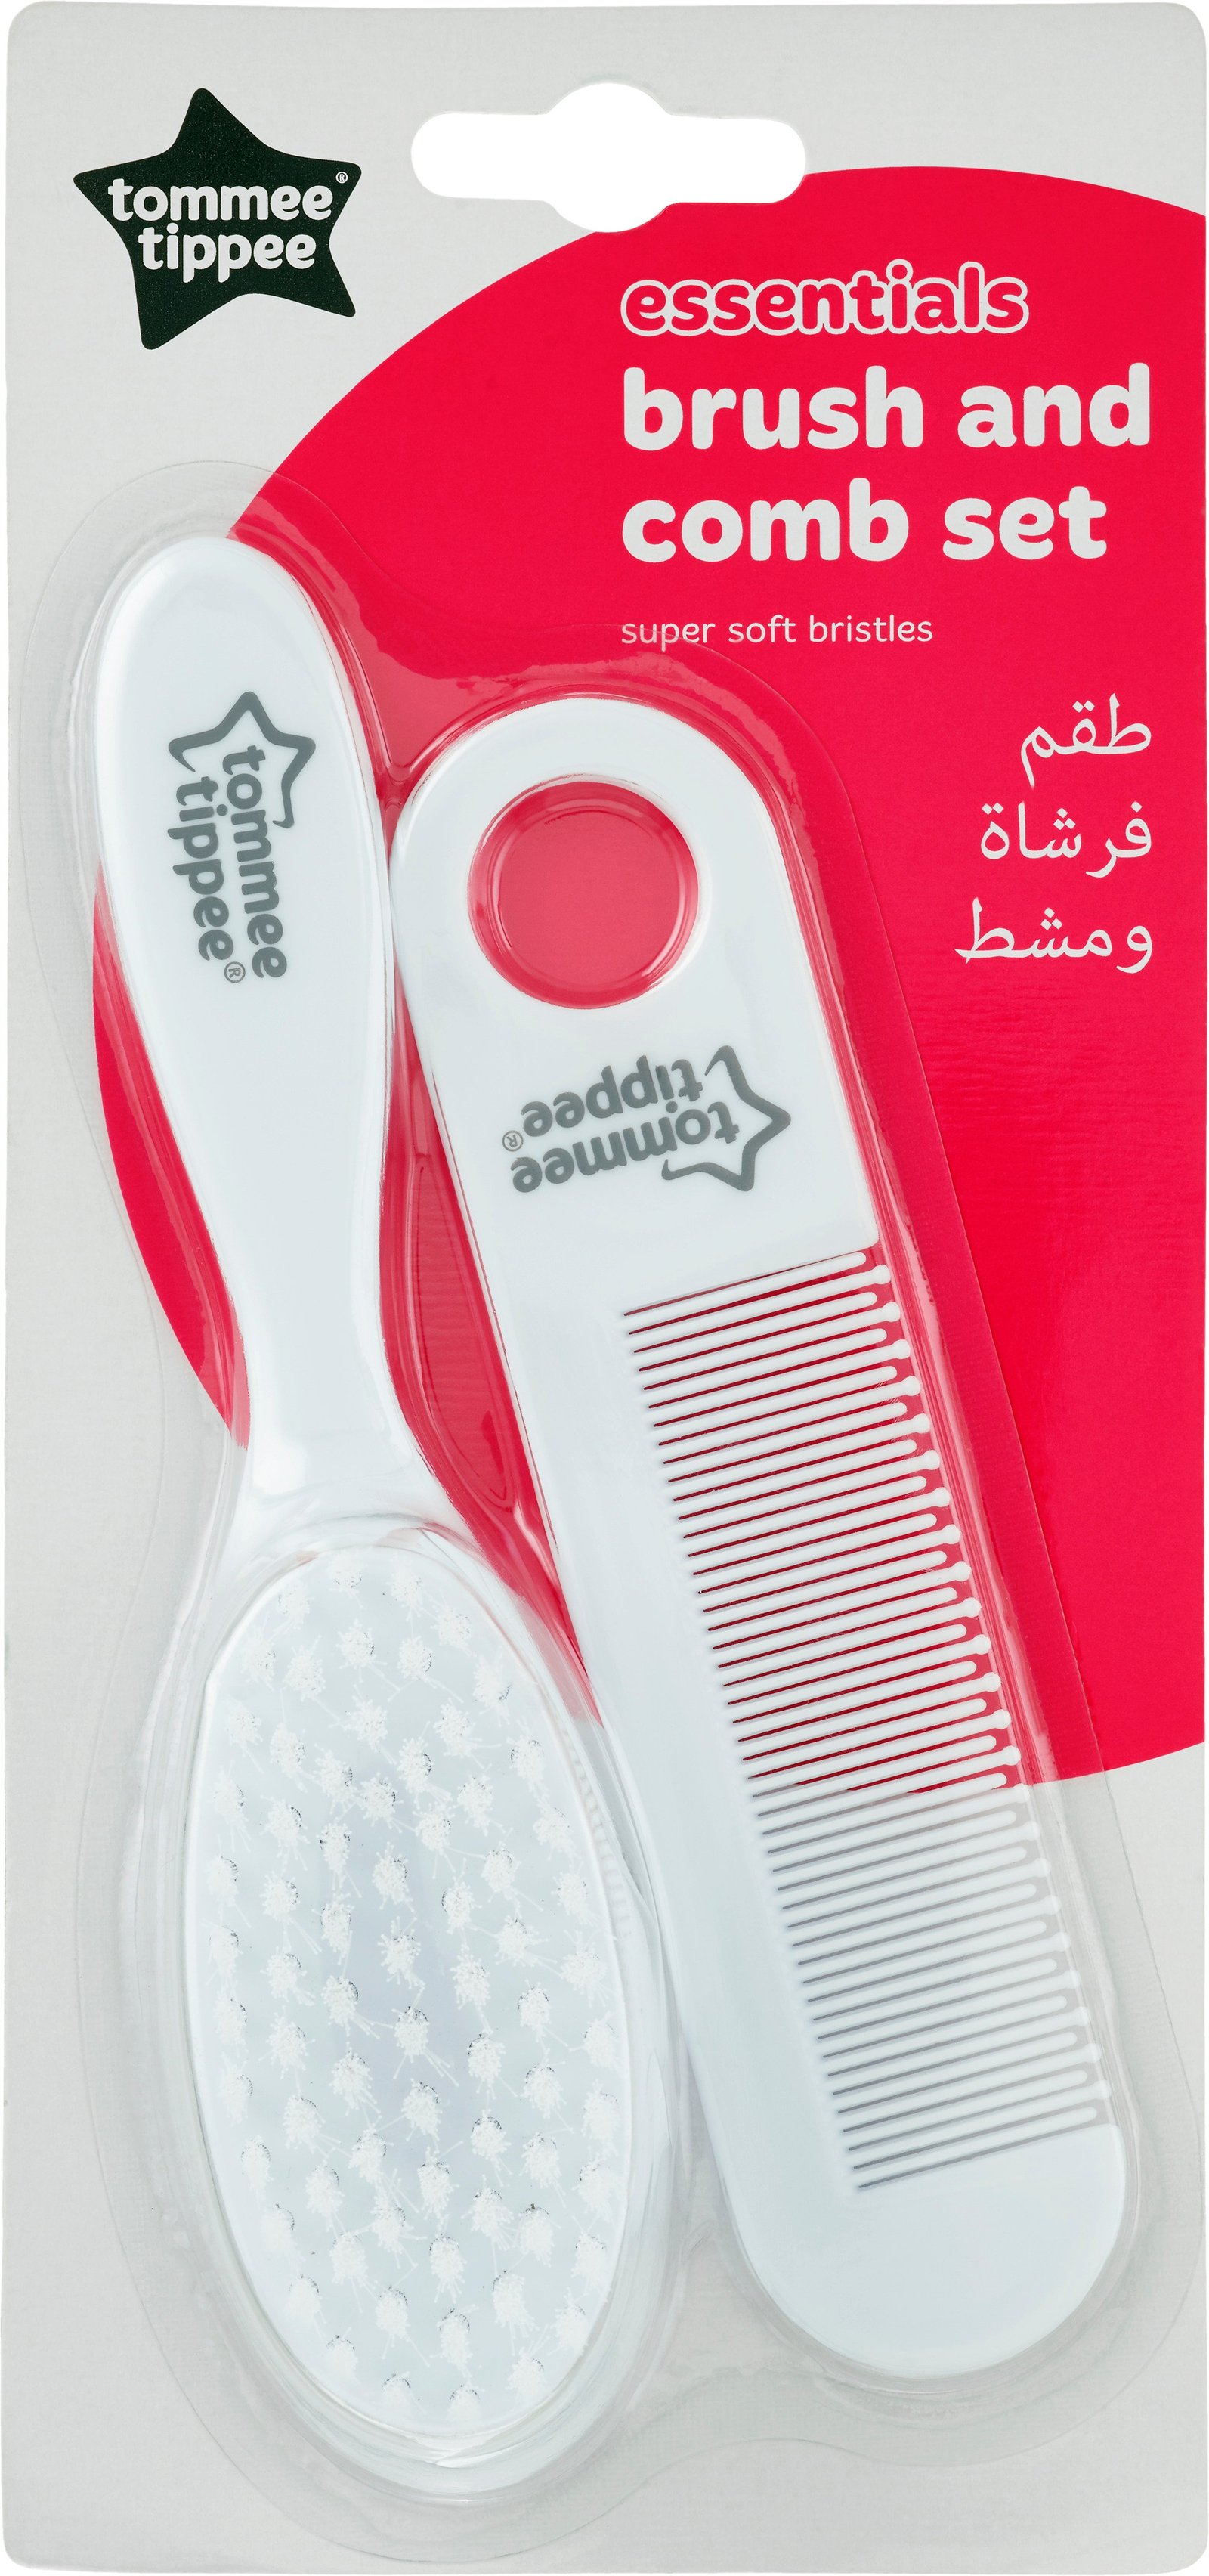 Tommee Tippee Ess entials Brush & Comb Set